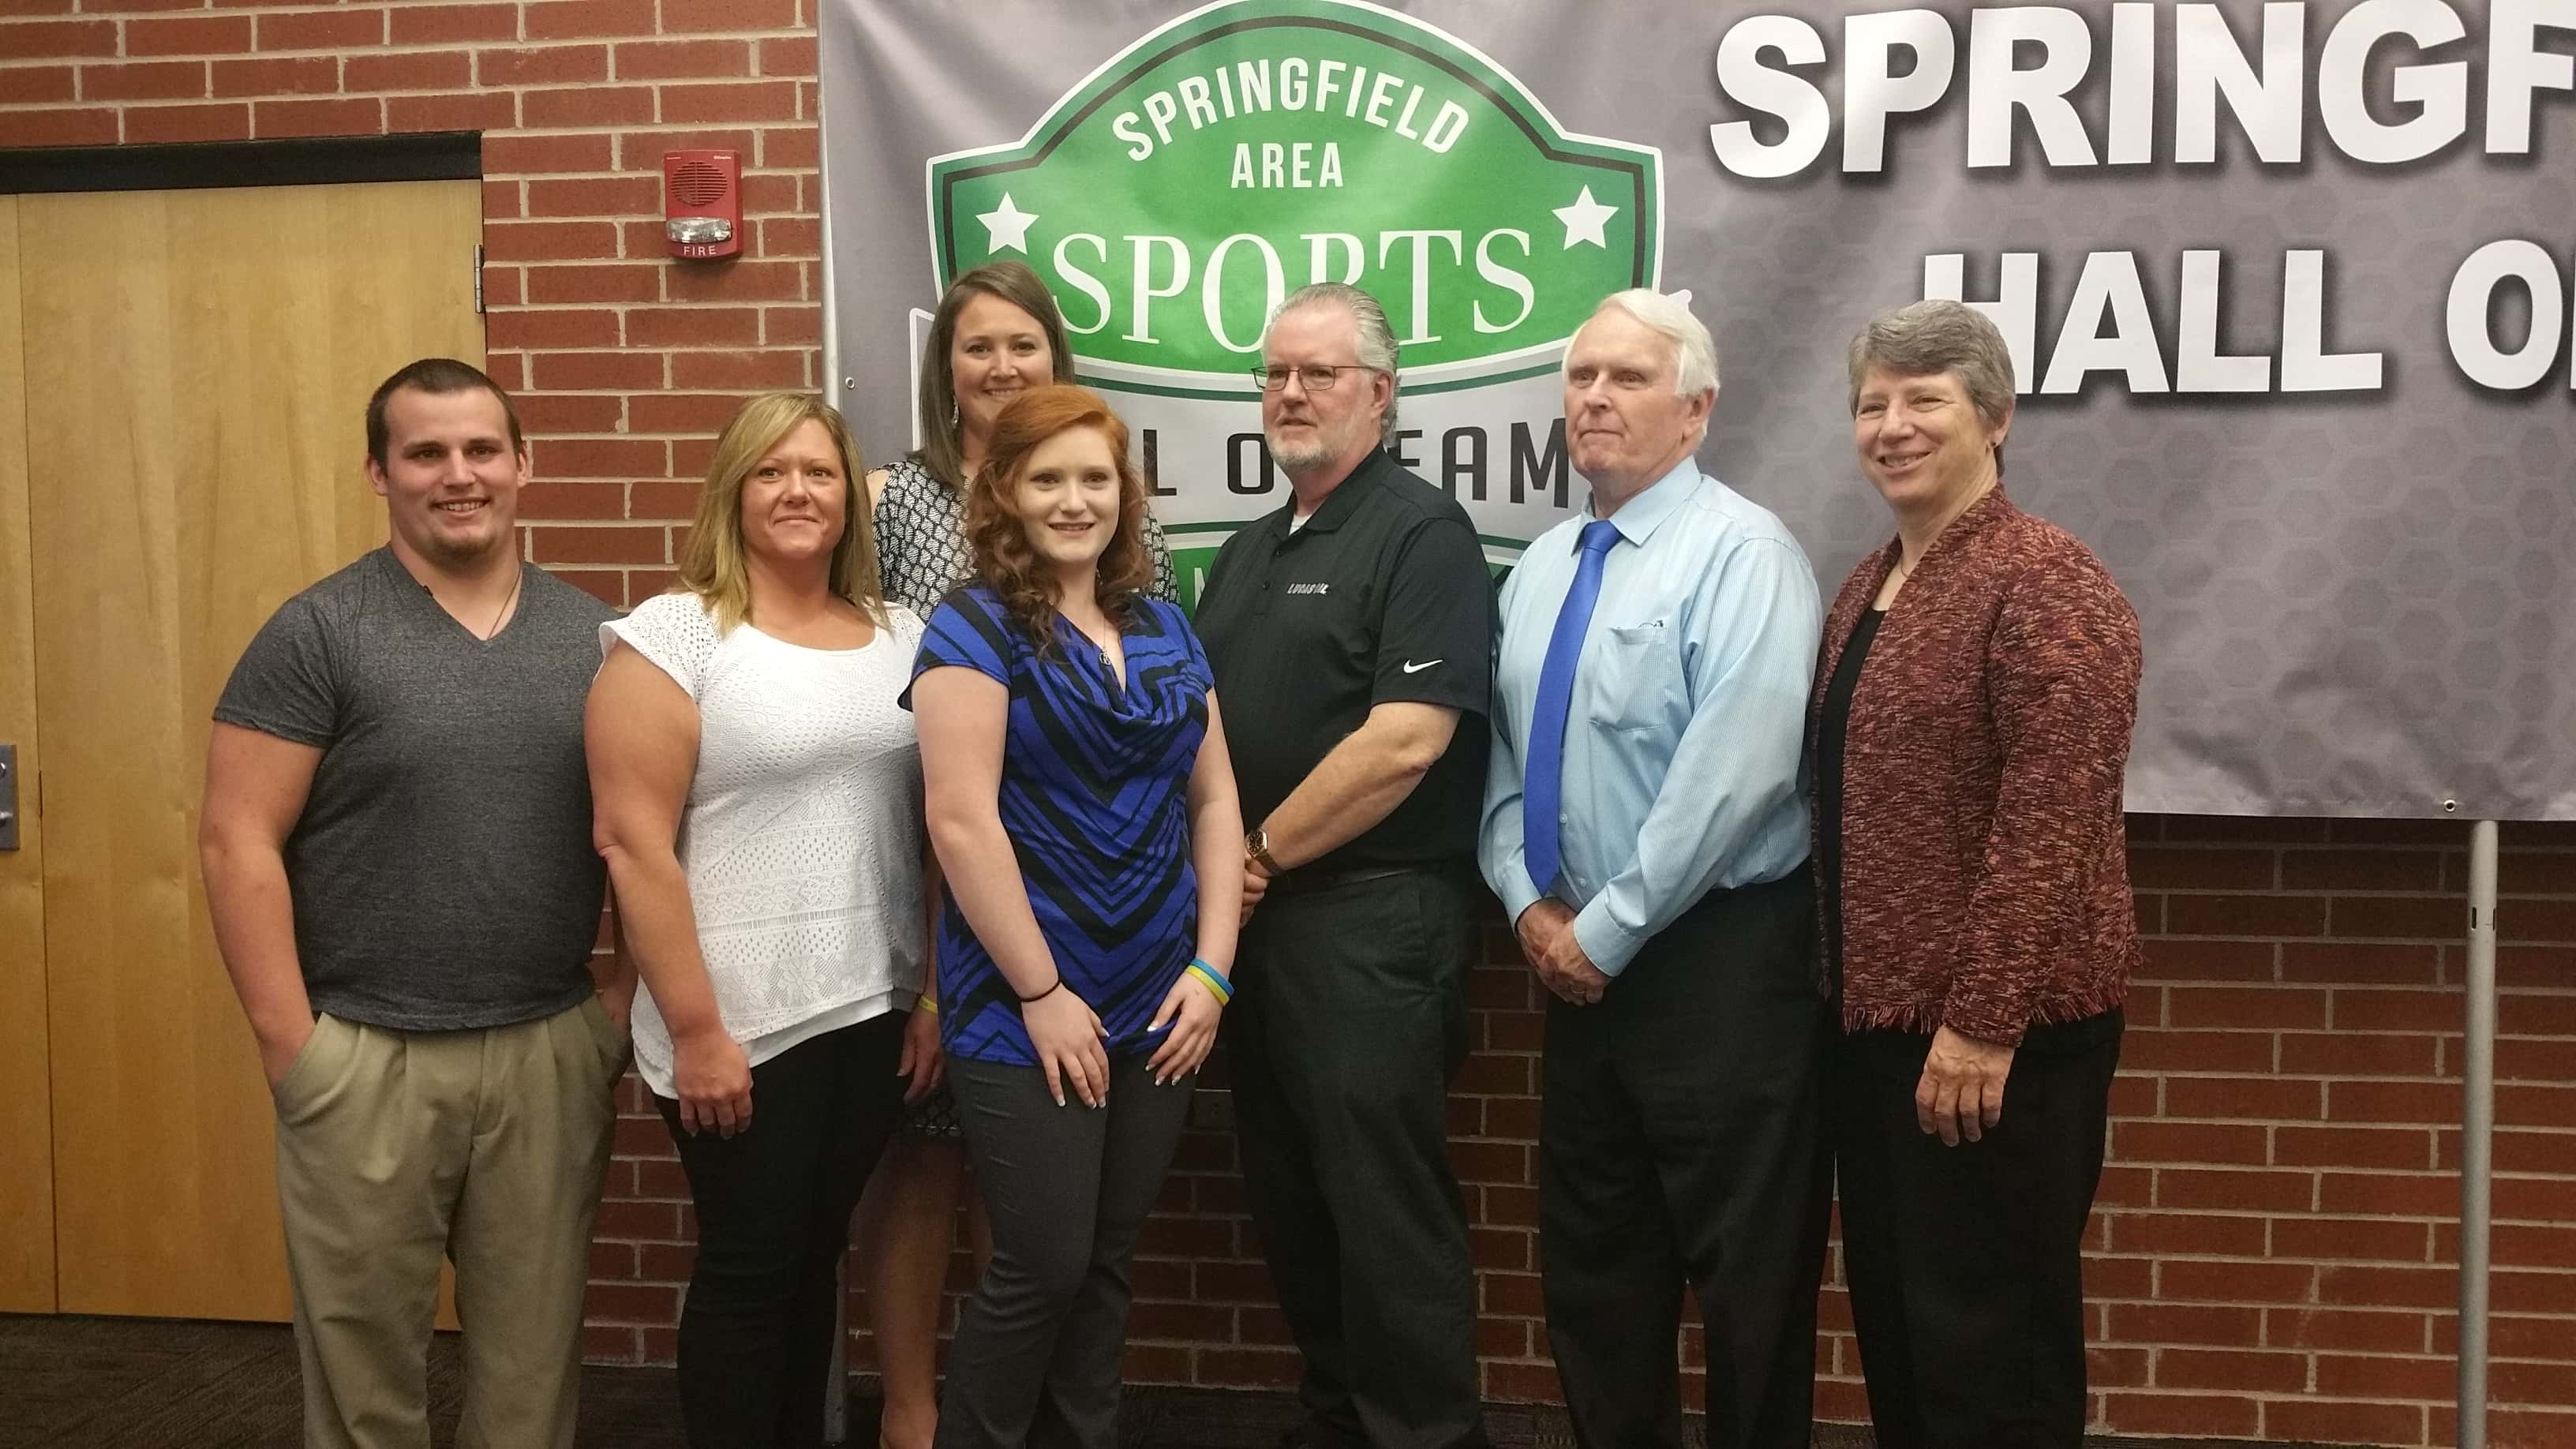 Springfield Sports Hall of Fame Guest Speakers